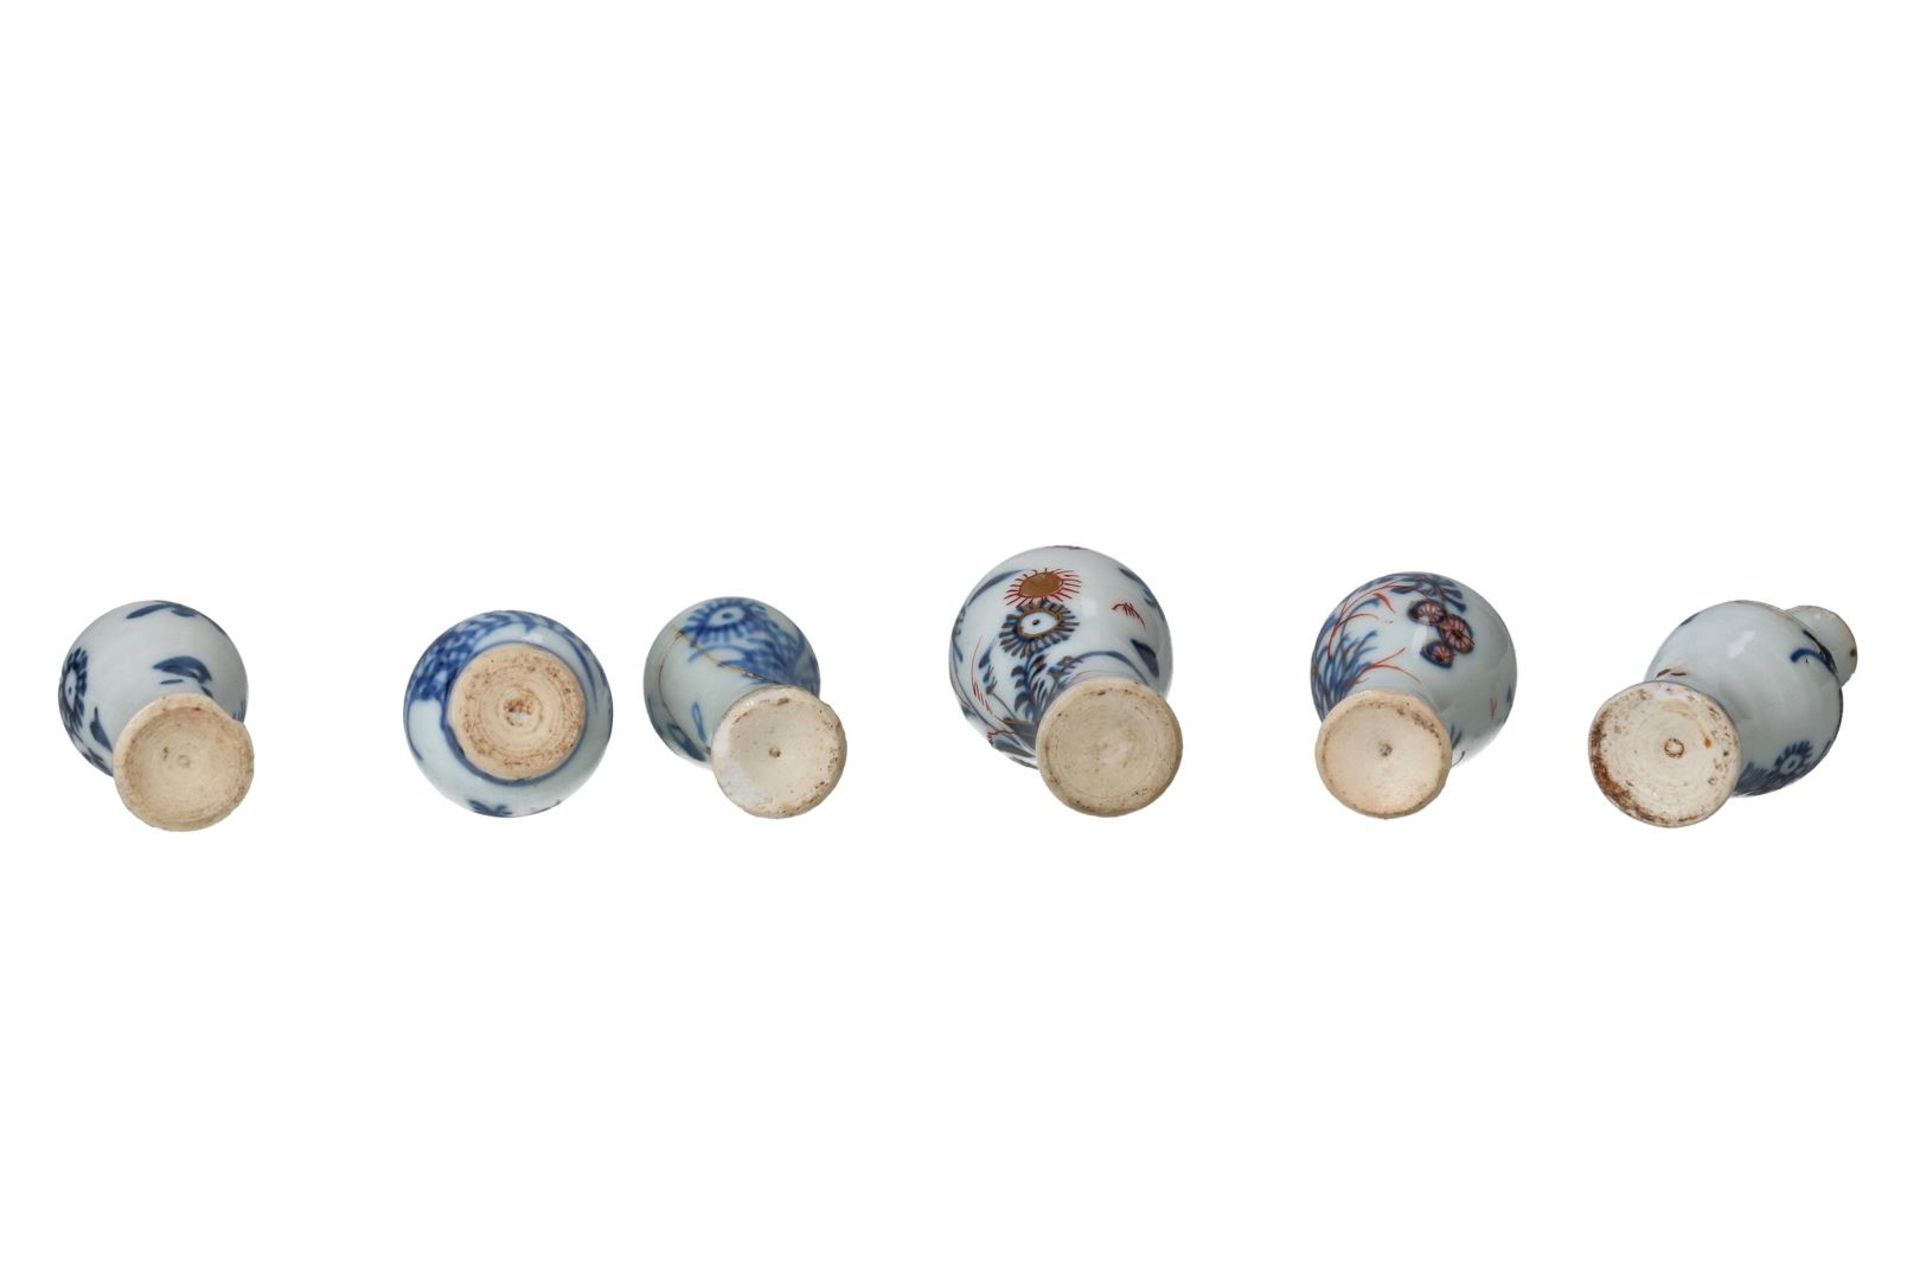 Lot of twelve blue and white Imari porcelain miniature vases, decorated with flowers. Unmarked. - Image 7 of 7